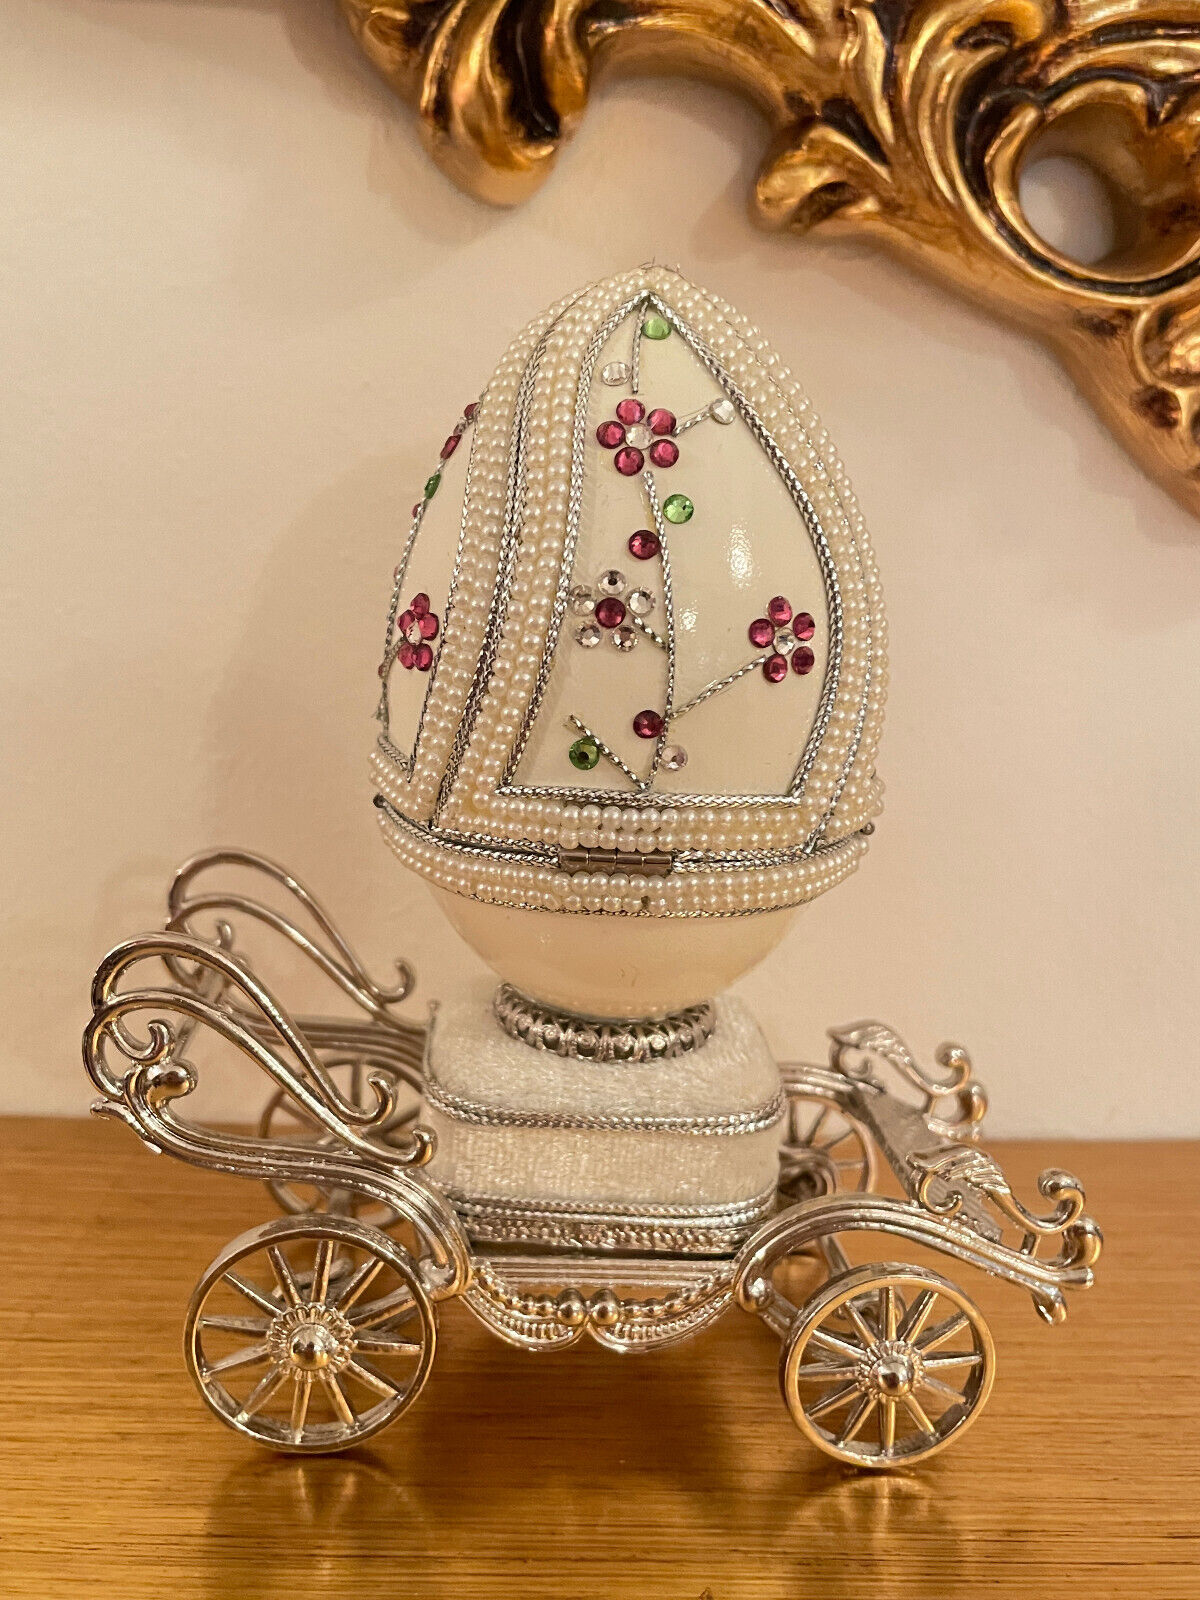 Royal Faberge egg handcarved music box & 3 ct Diamond Faberge Jewelry Fabergé